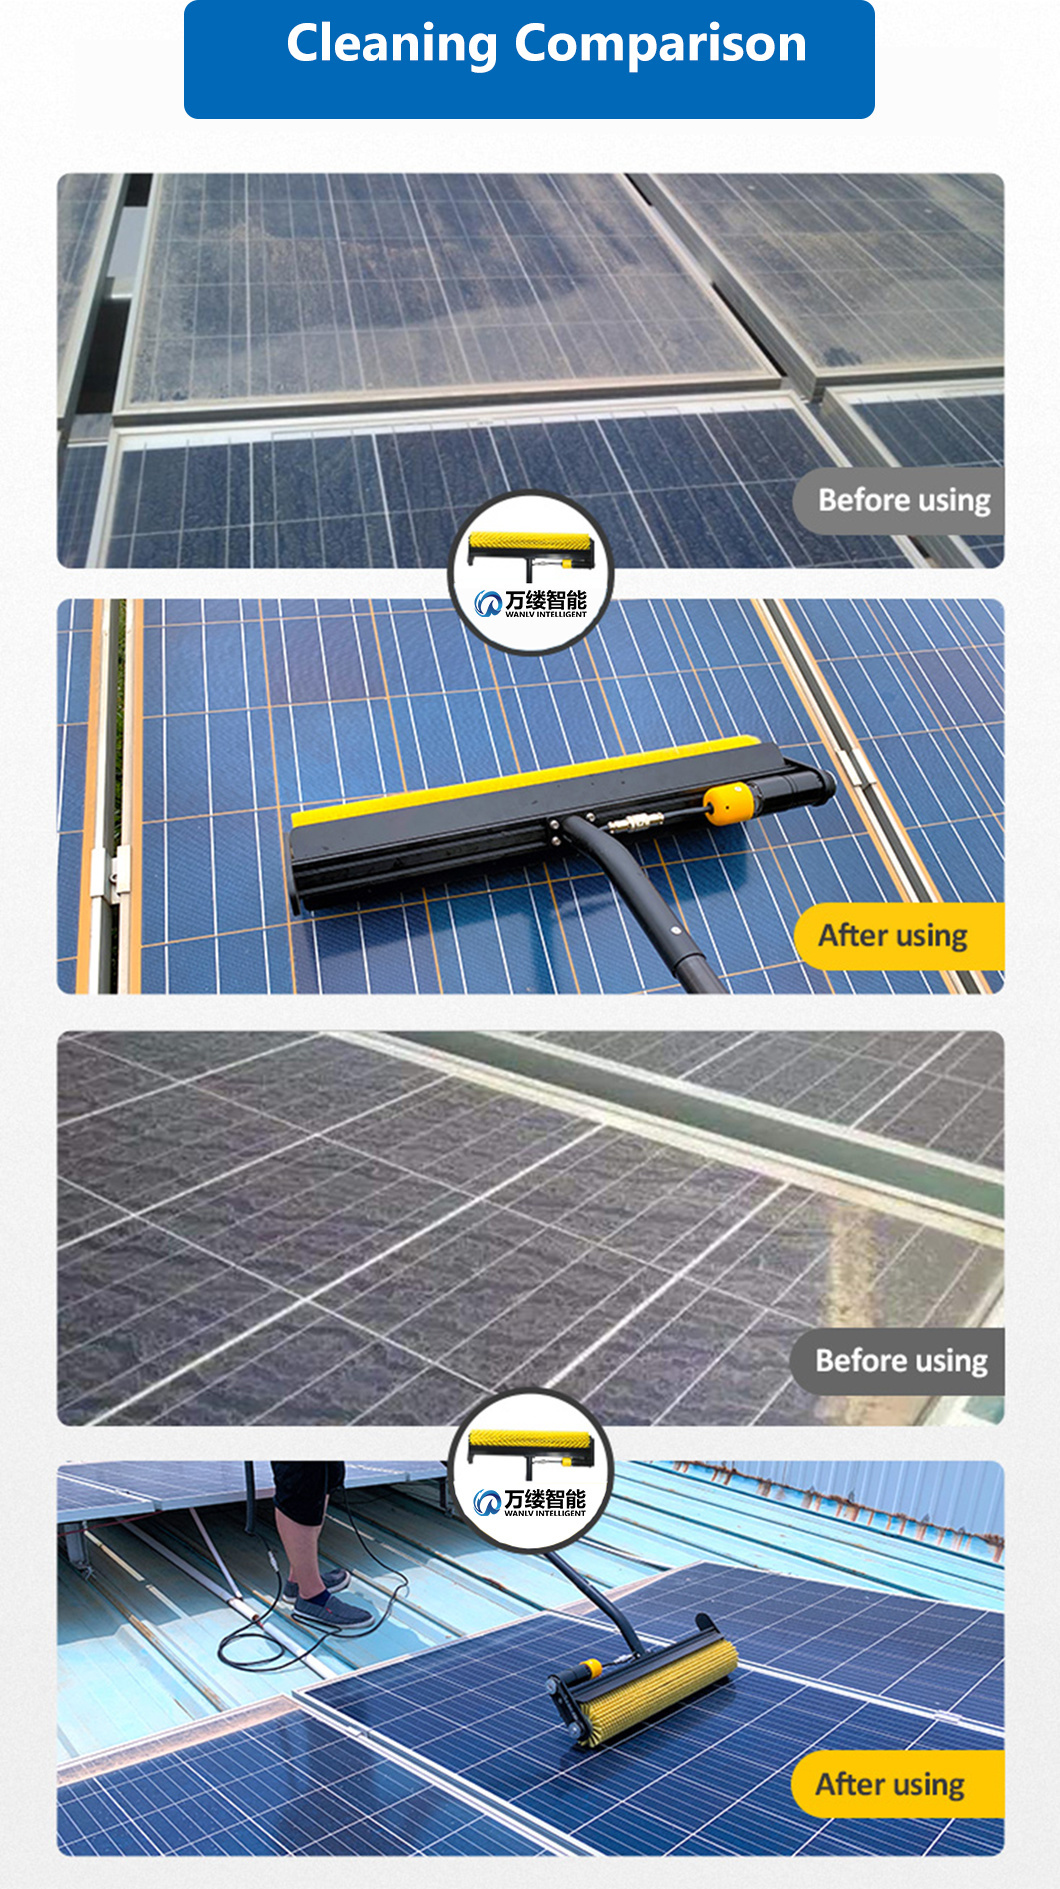 Retractable Pole Solar Panel Cleaning Rotary Brush for Solar Panels in All Scenarios